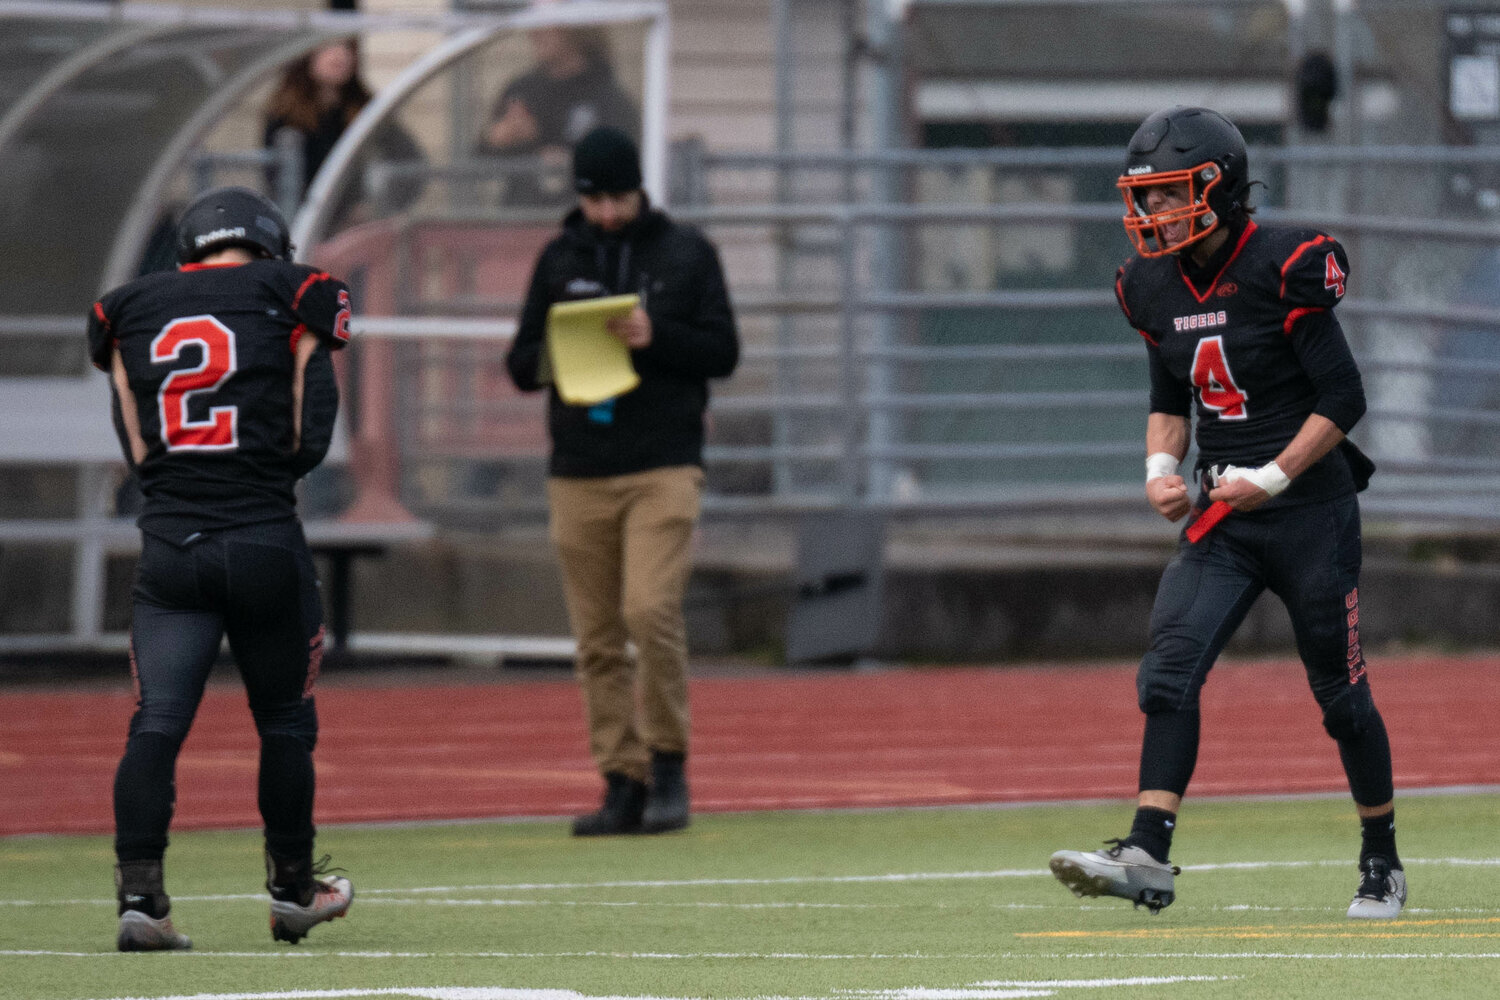 Ashton Demarest (4) celebrates with Cael Stanley after scoring a touchdown during Napavine's 36-26 win over Onalaska in the 2B semifinals at Tumwater District Stadium on Nov. 25.